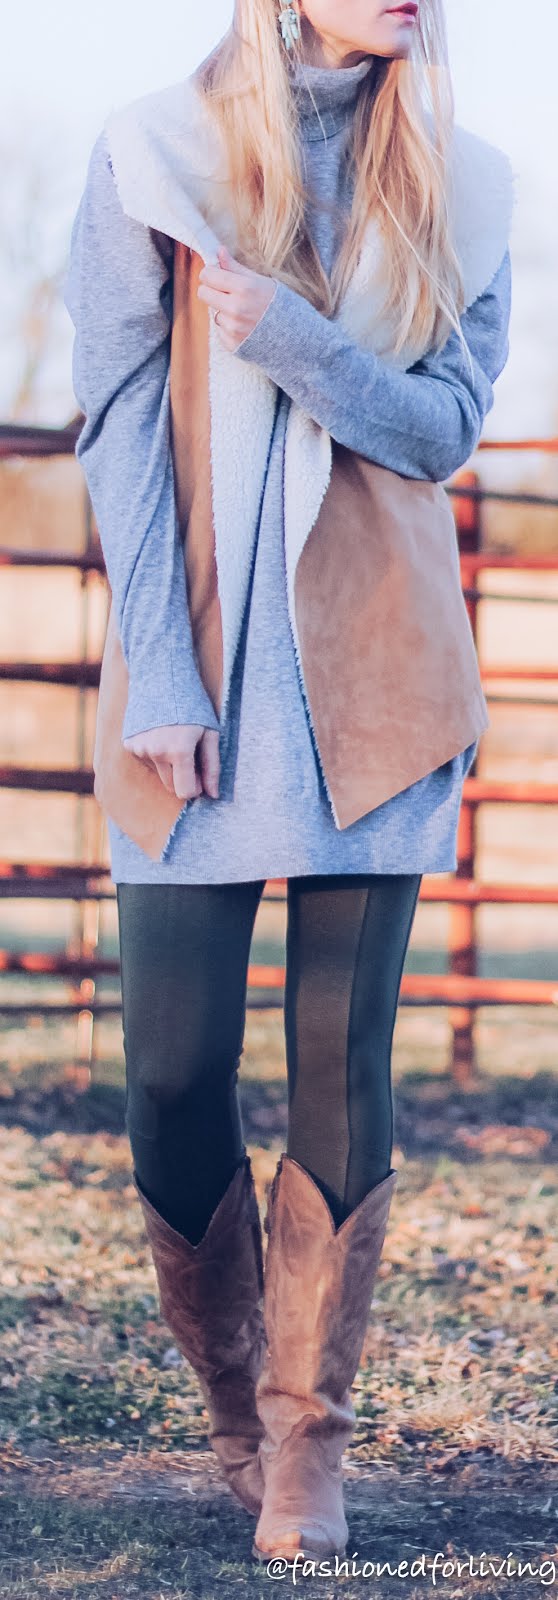 Fashioned For Living: olive green leggings outfit - sweater dress